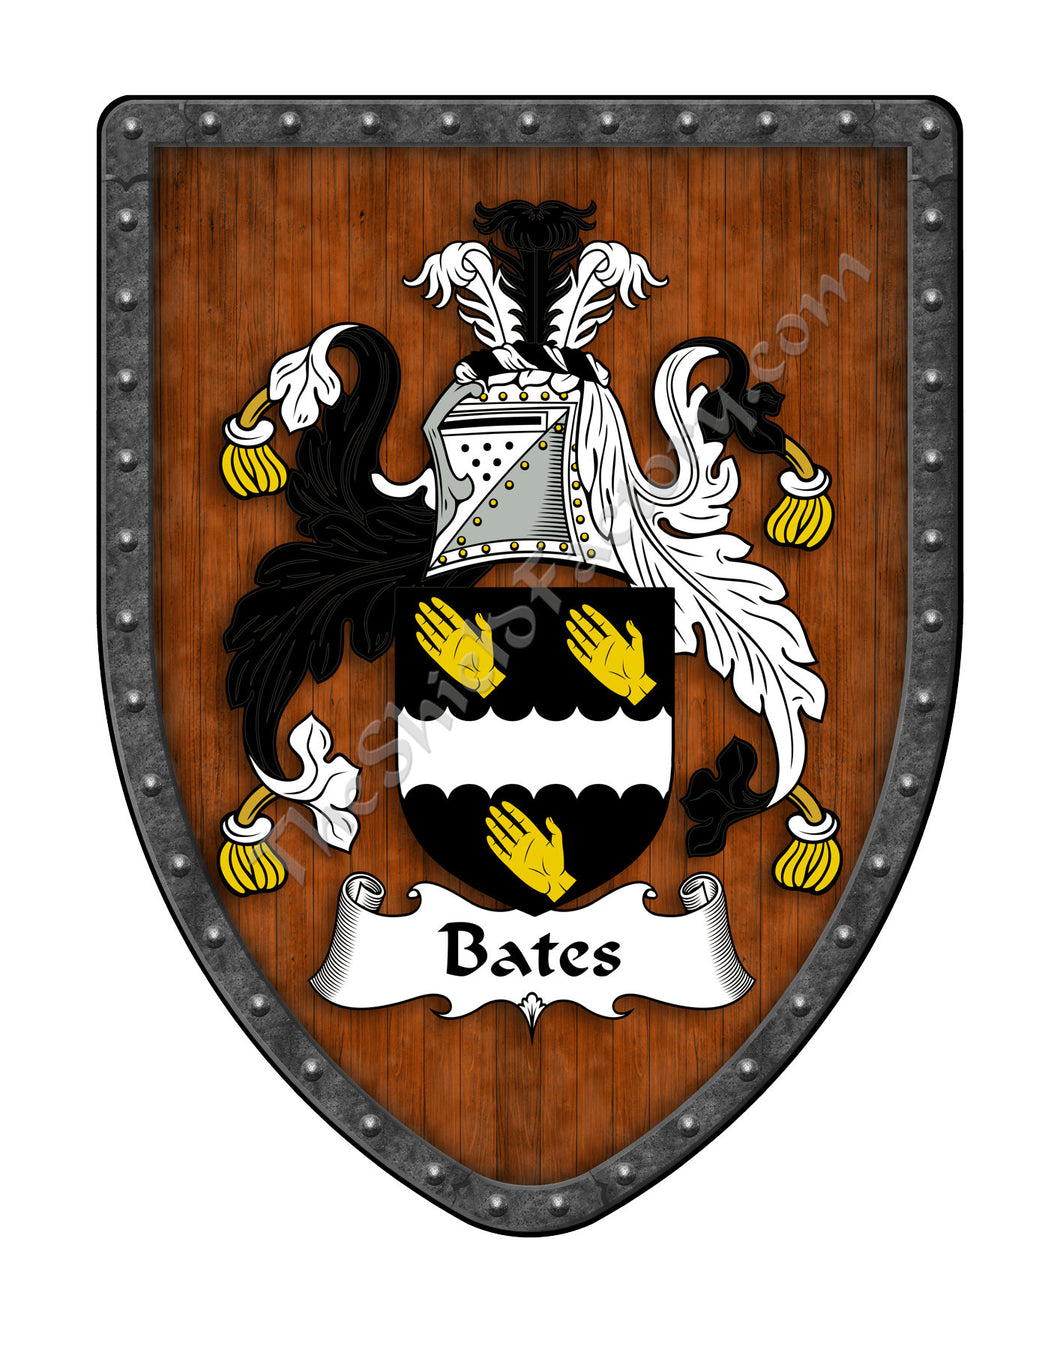 Bates Family Crest Coat of Arms